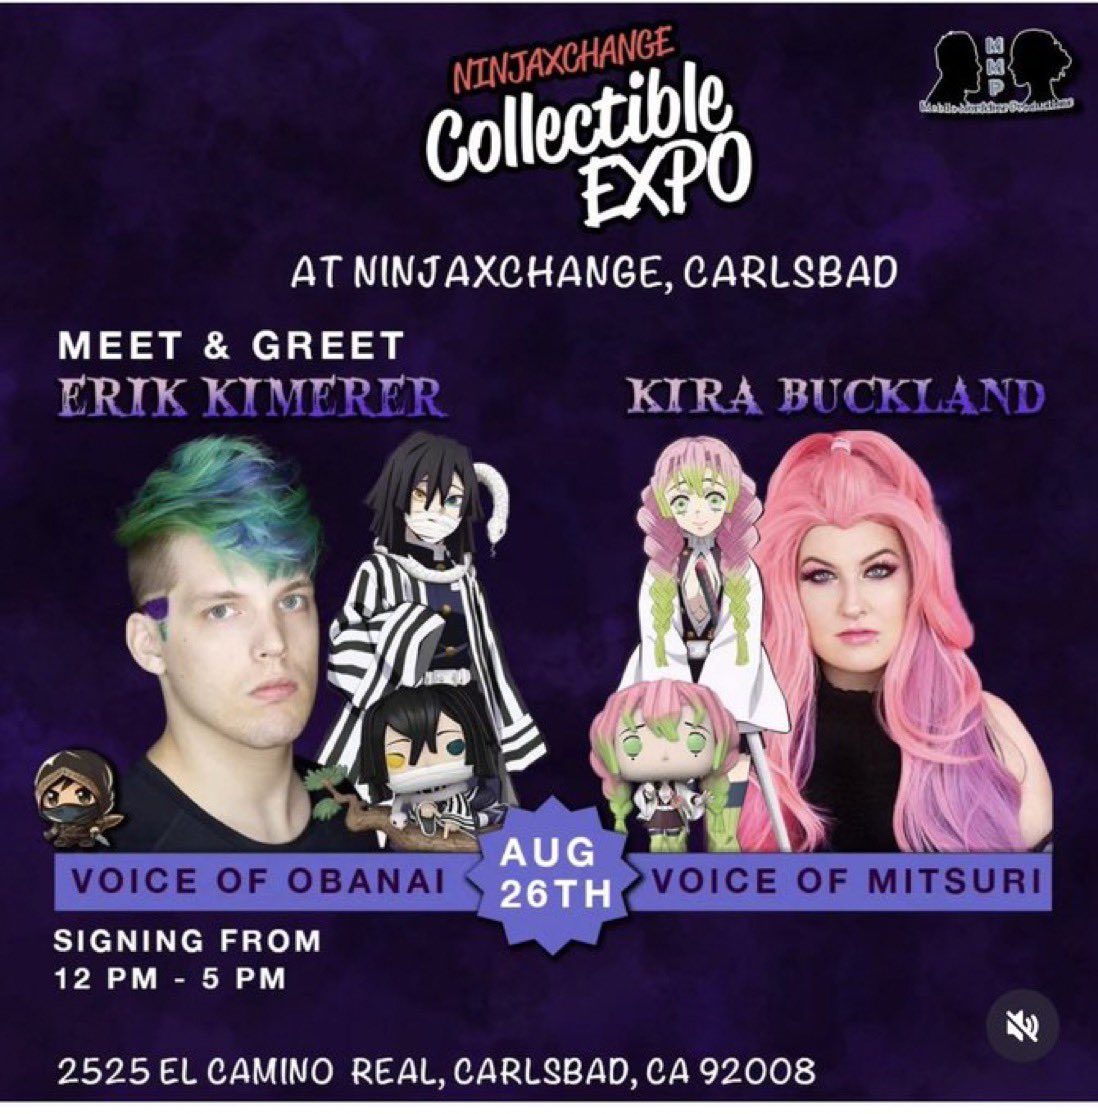 I’ll be signing this weekend with @KiraBuckland in Carlsbad, CA! Come out to #NinjaXChange on Sat 8/26 to meet Obanai & Mitsuri together! #DemonSlayer